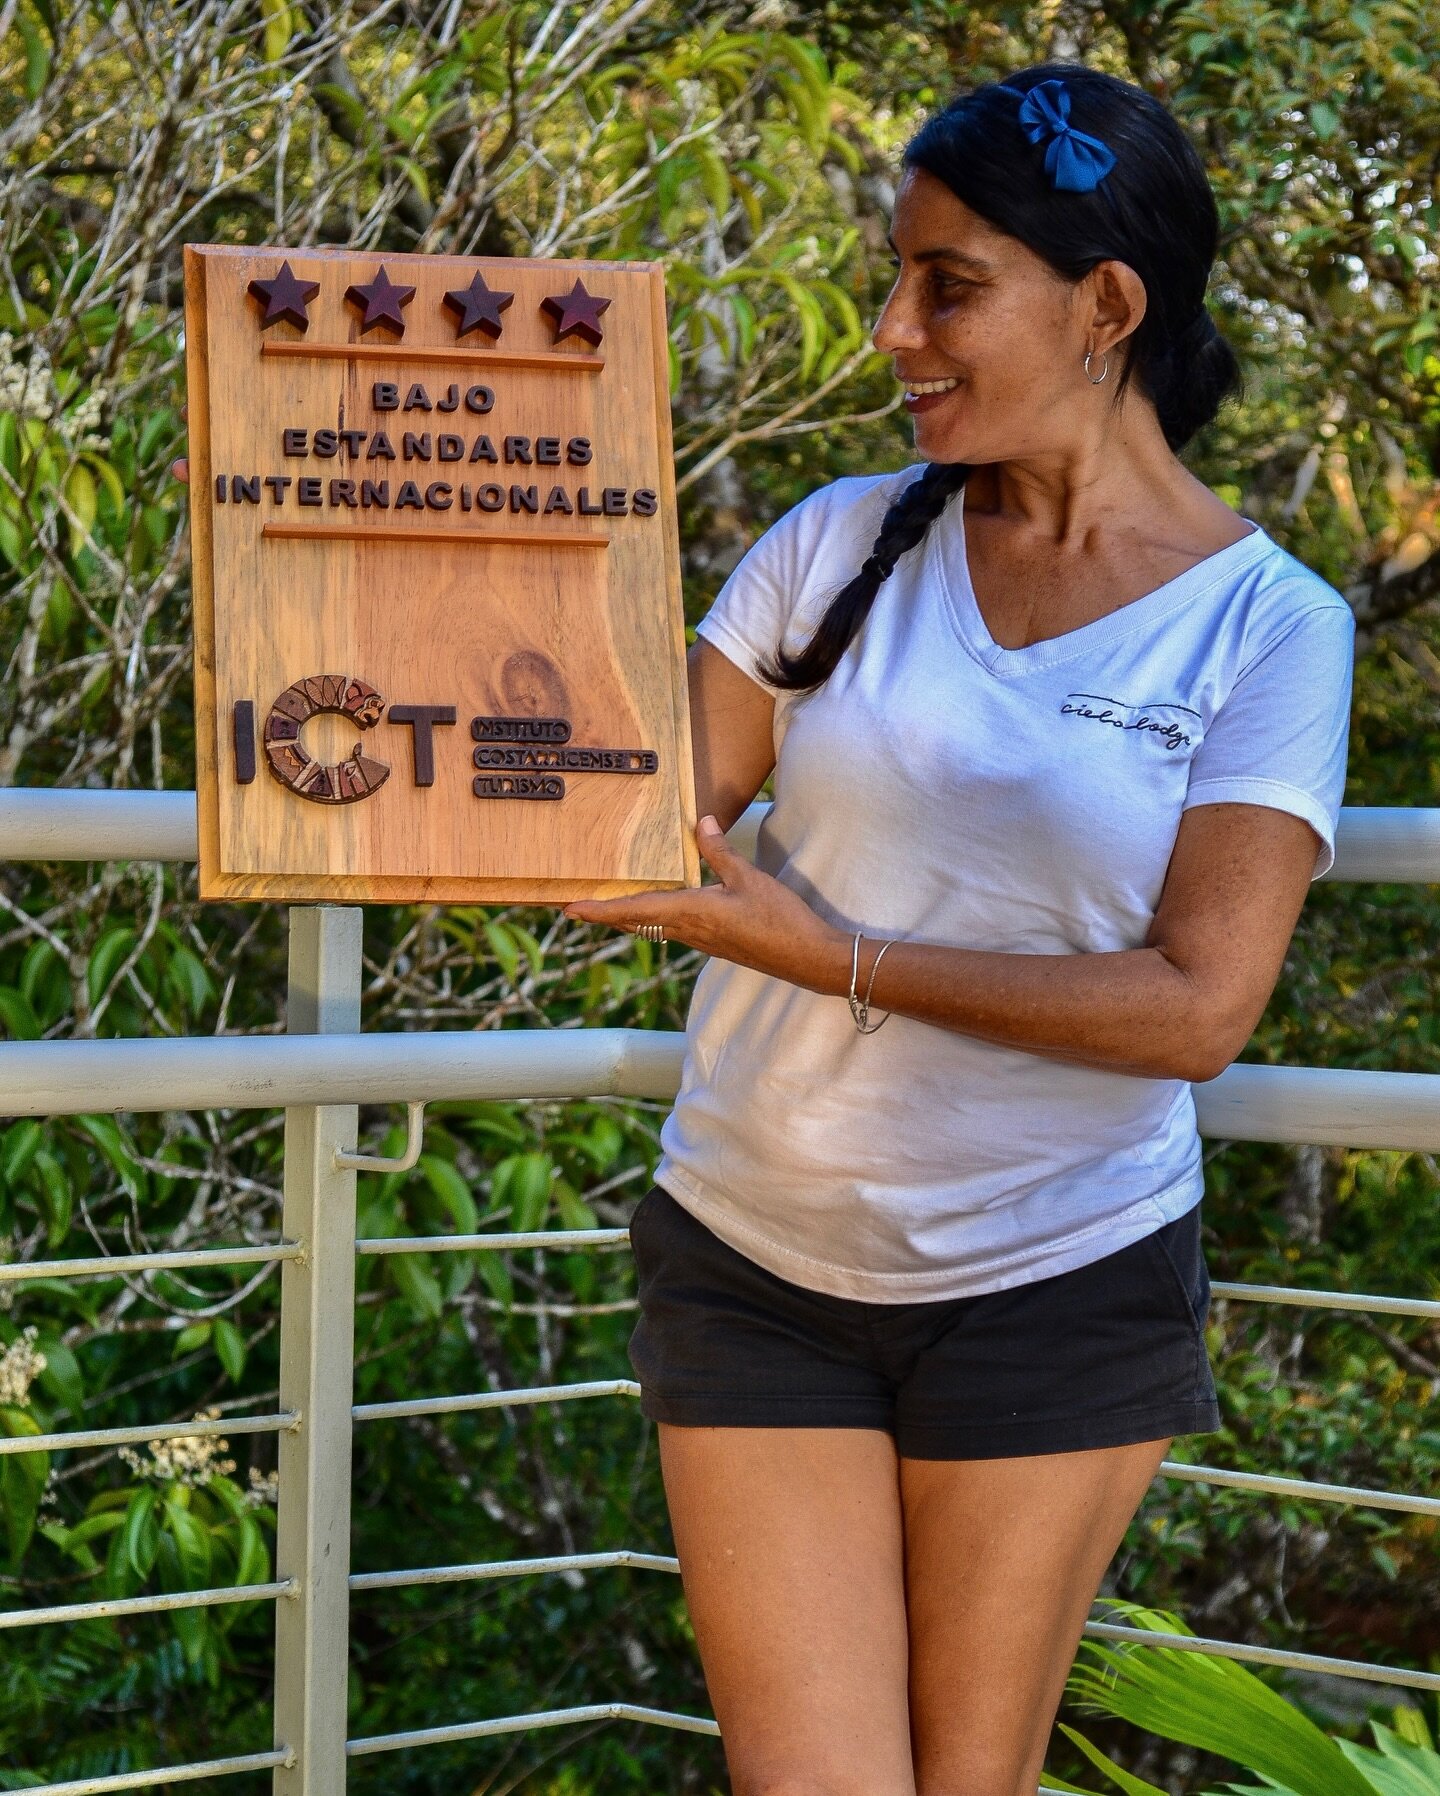 As March comes to a close, we&rsquo;re honoring Women&rsquo;s History Month by recognizing our General Manager,&nbsp;Catalina Torres Portela&nbsp;for her remarkable trajectory in Costa Rica&rsquo;s tourism industry and lasting impact on our boutique 